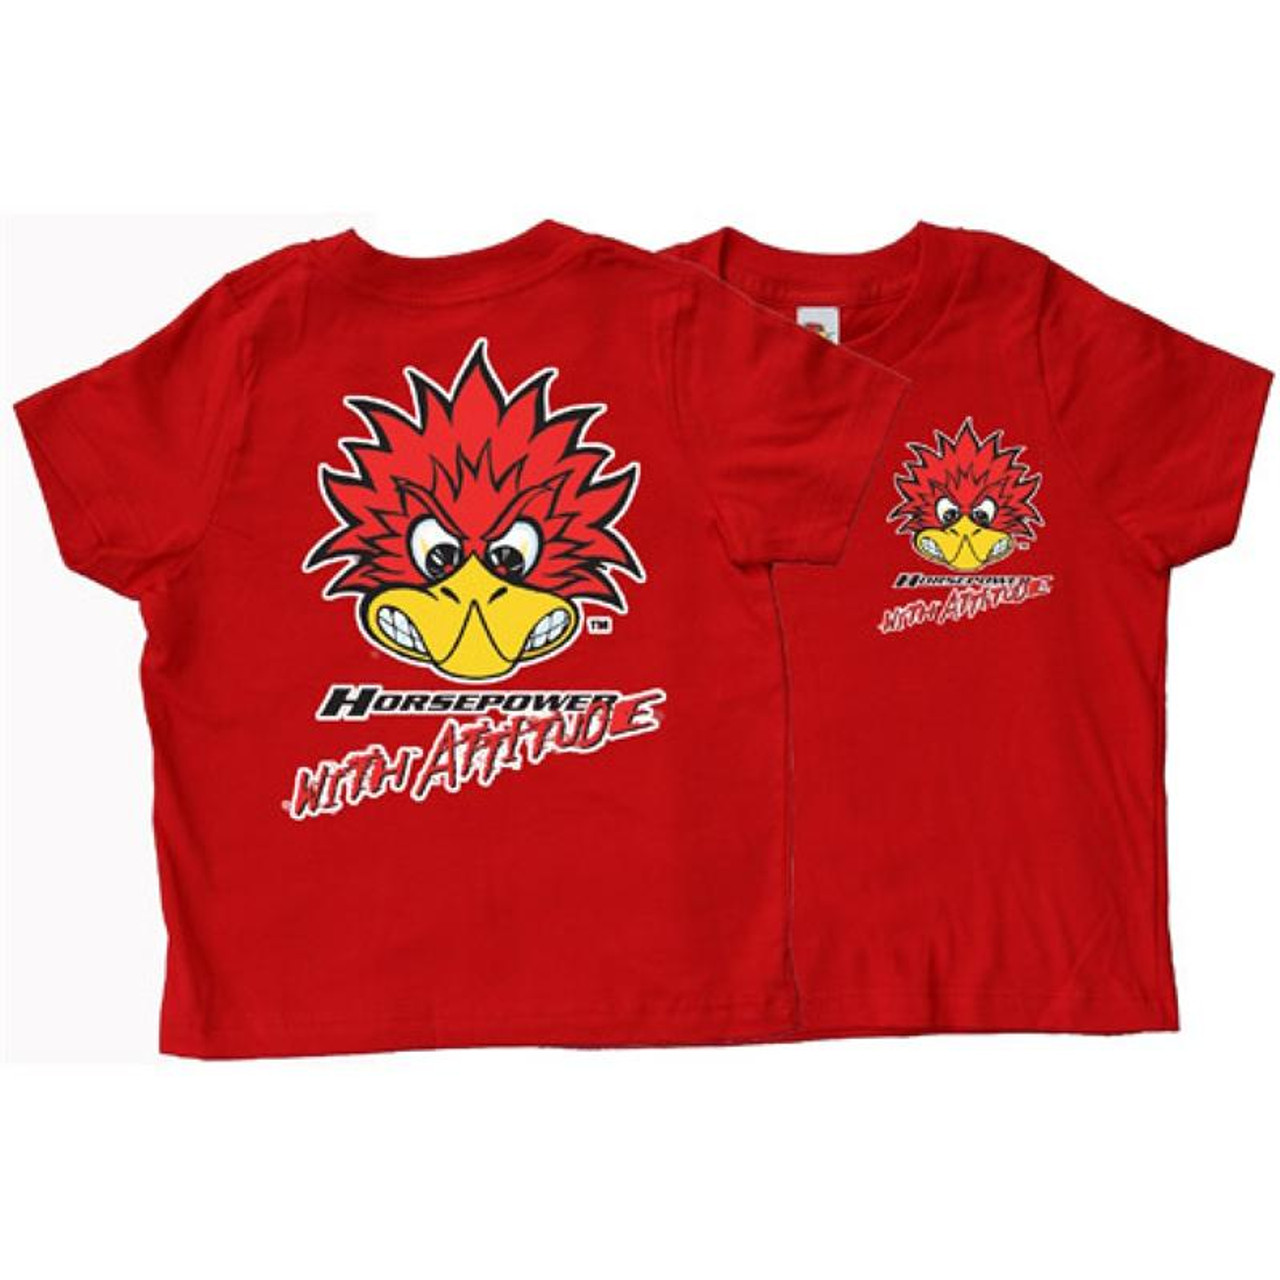 Youth T-Shirt W/Attitude Design - Red